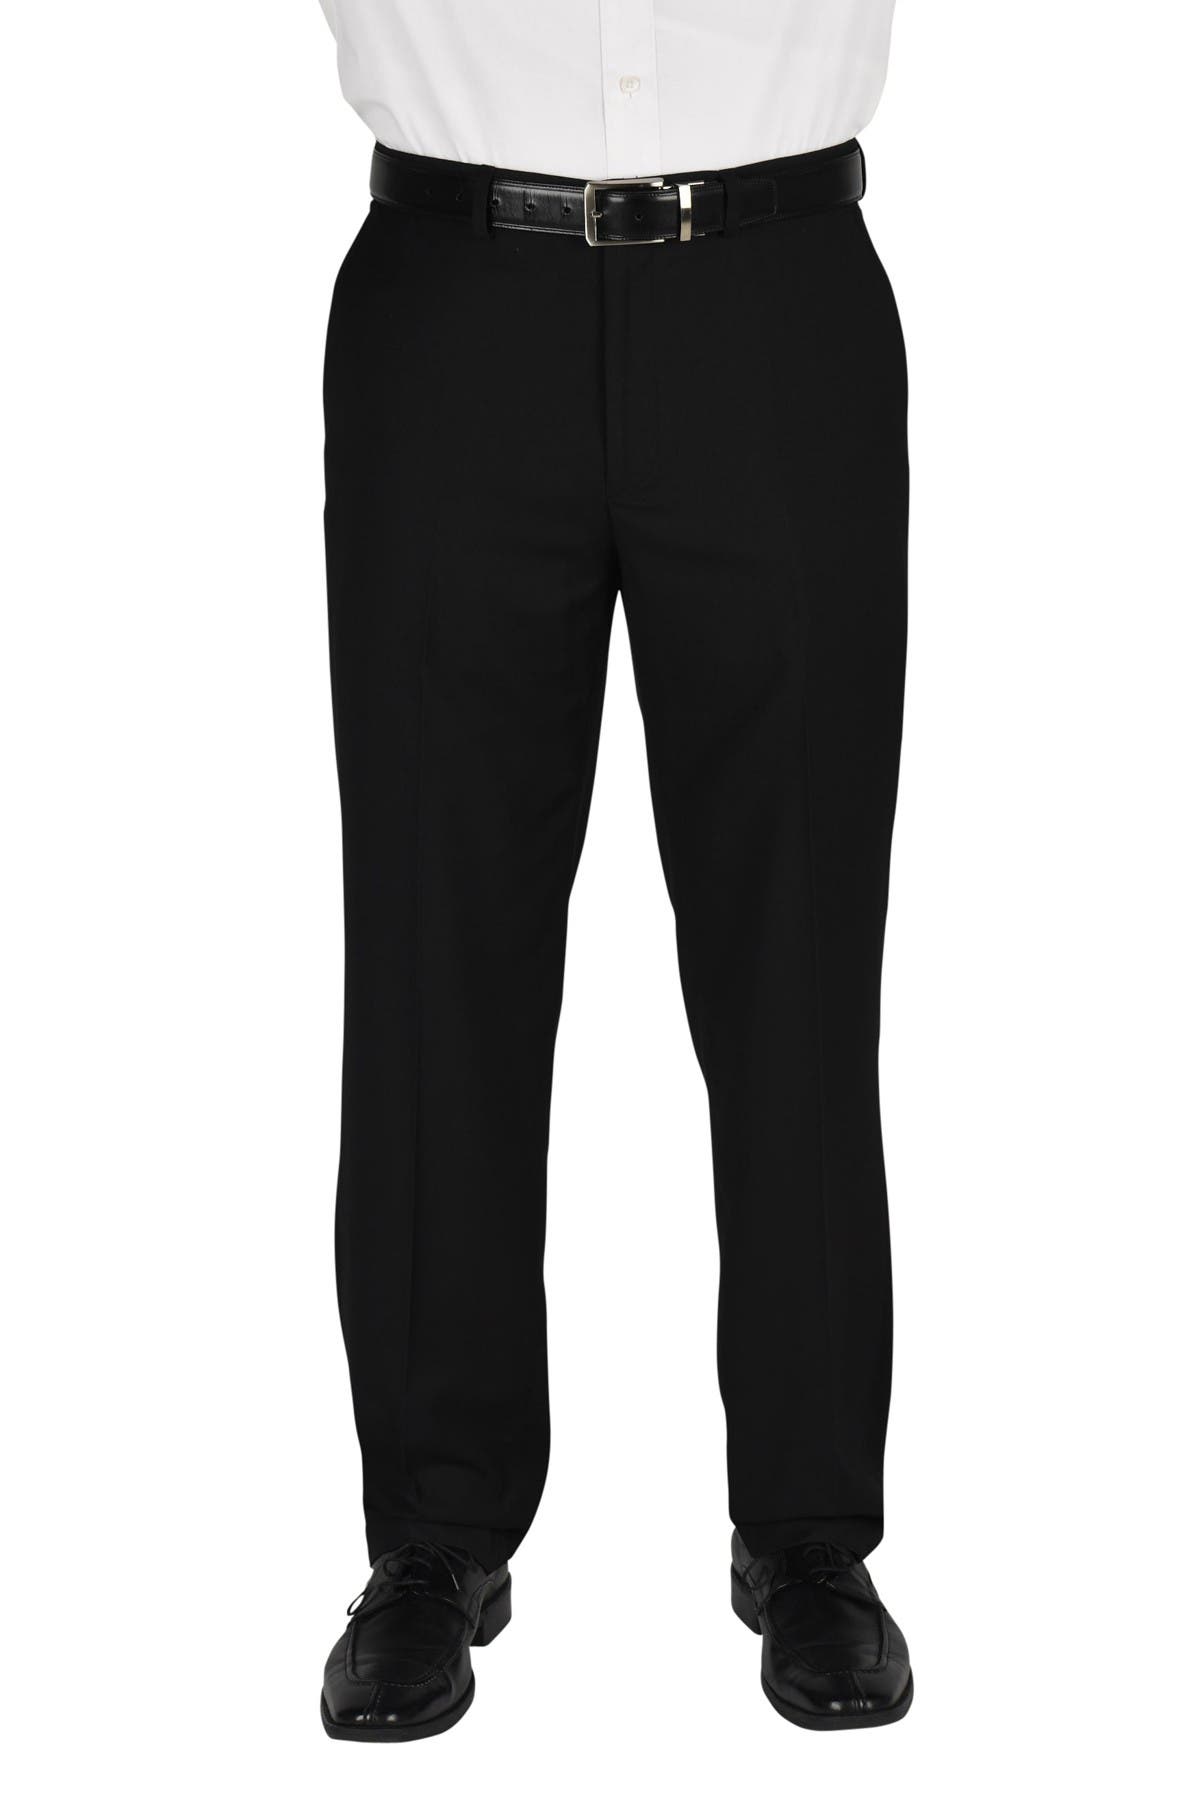 Dockers Flat Front Performance Stretch Straight Dress Pants In Black